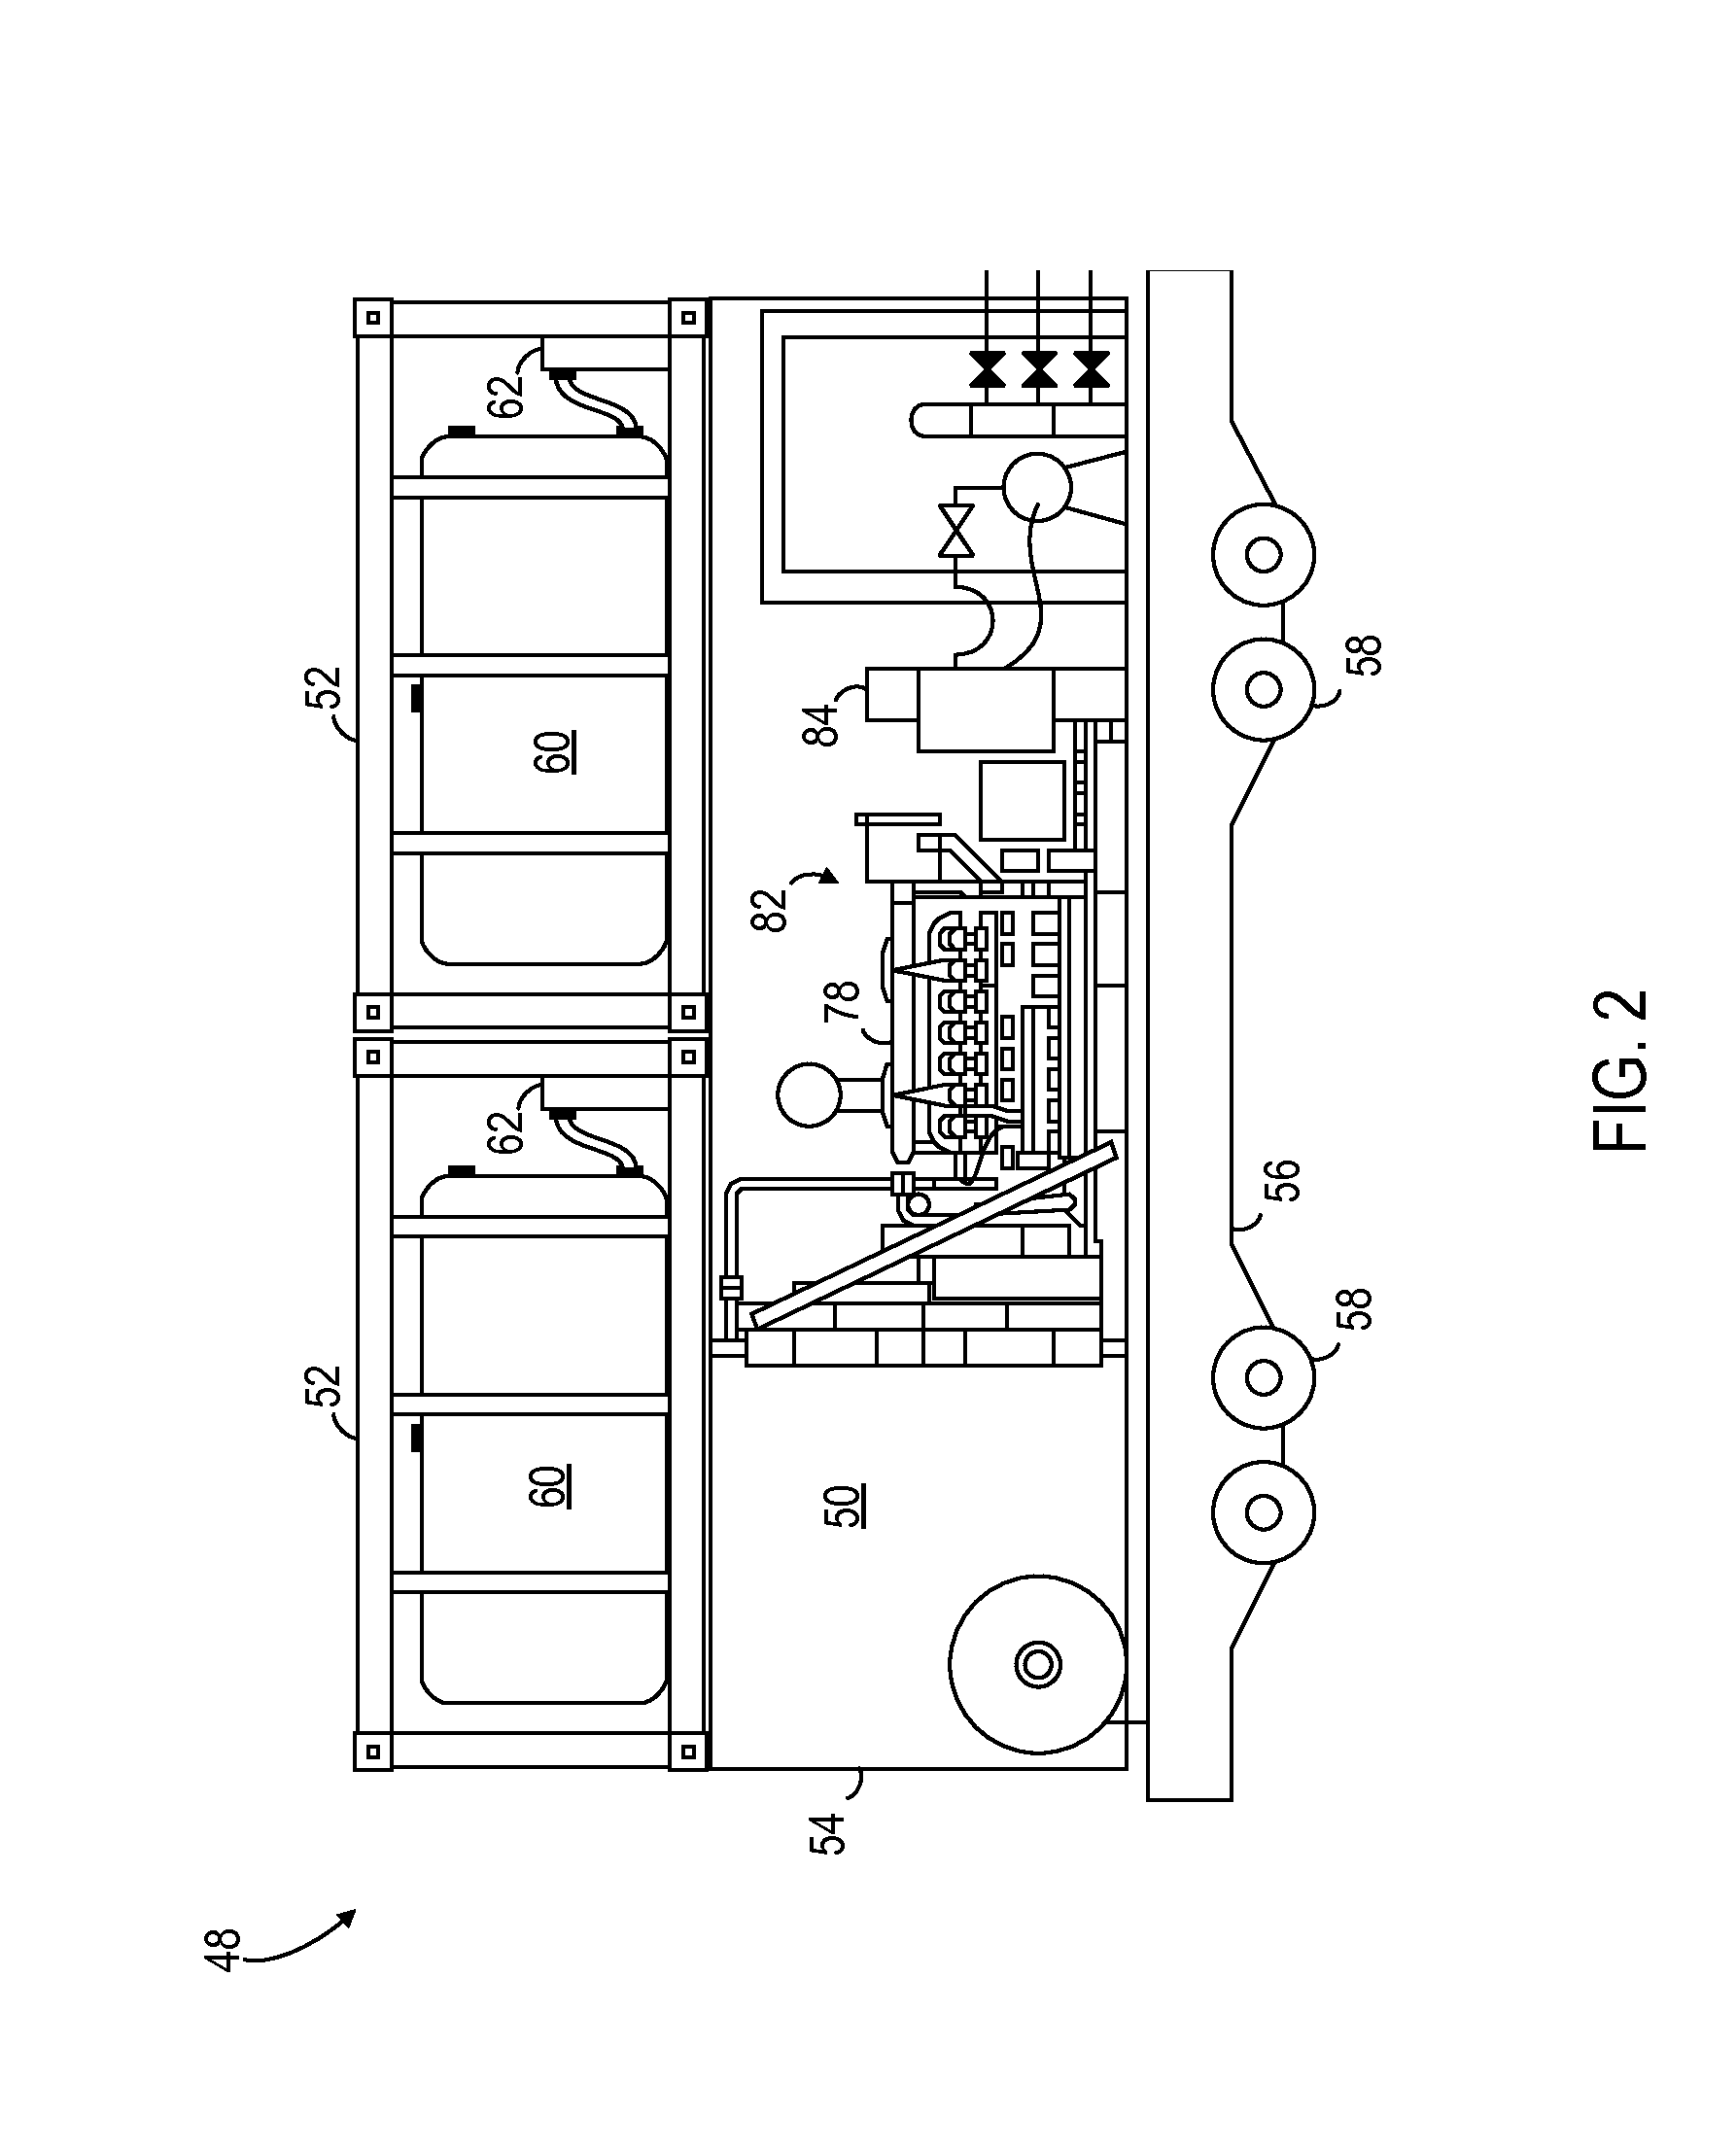 Fuel tank assembly and method of use